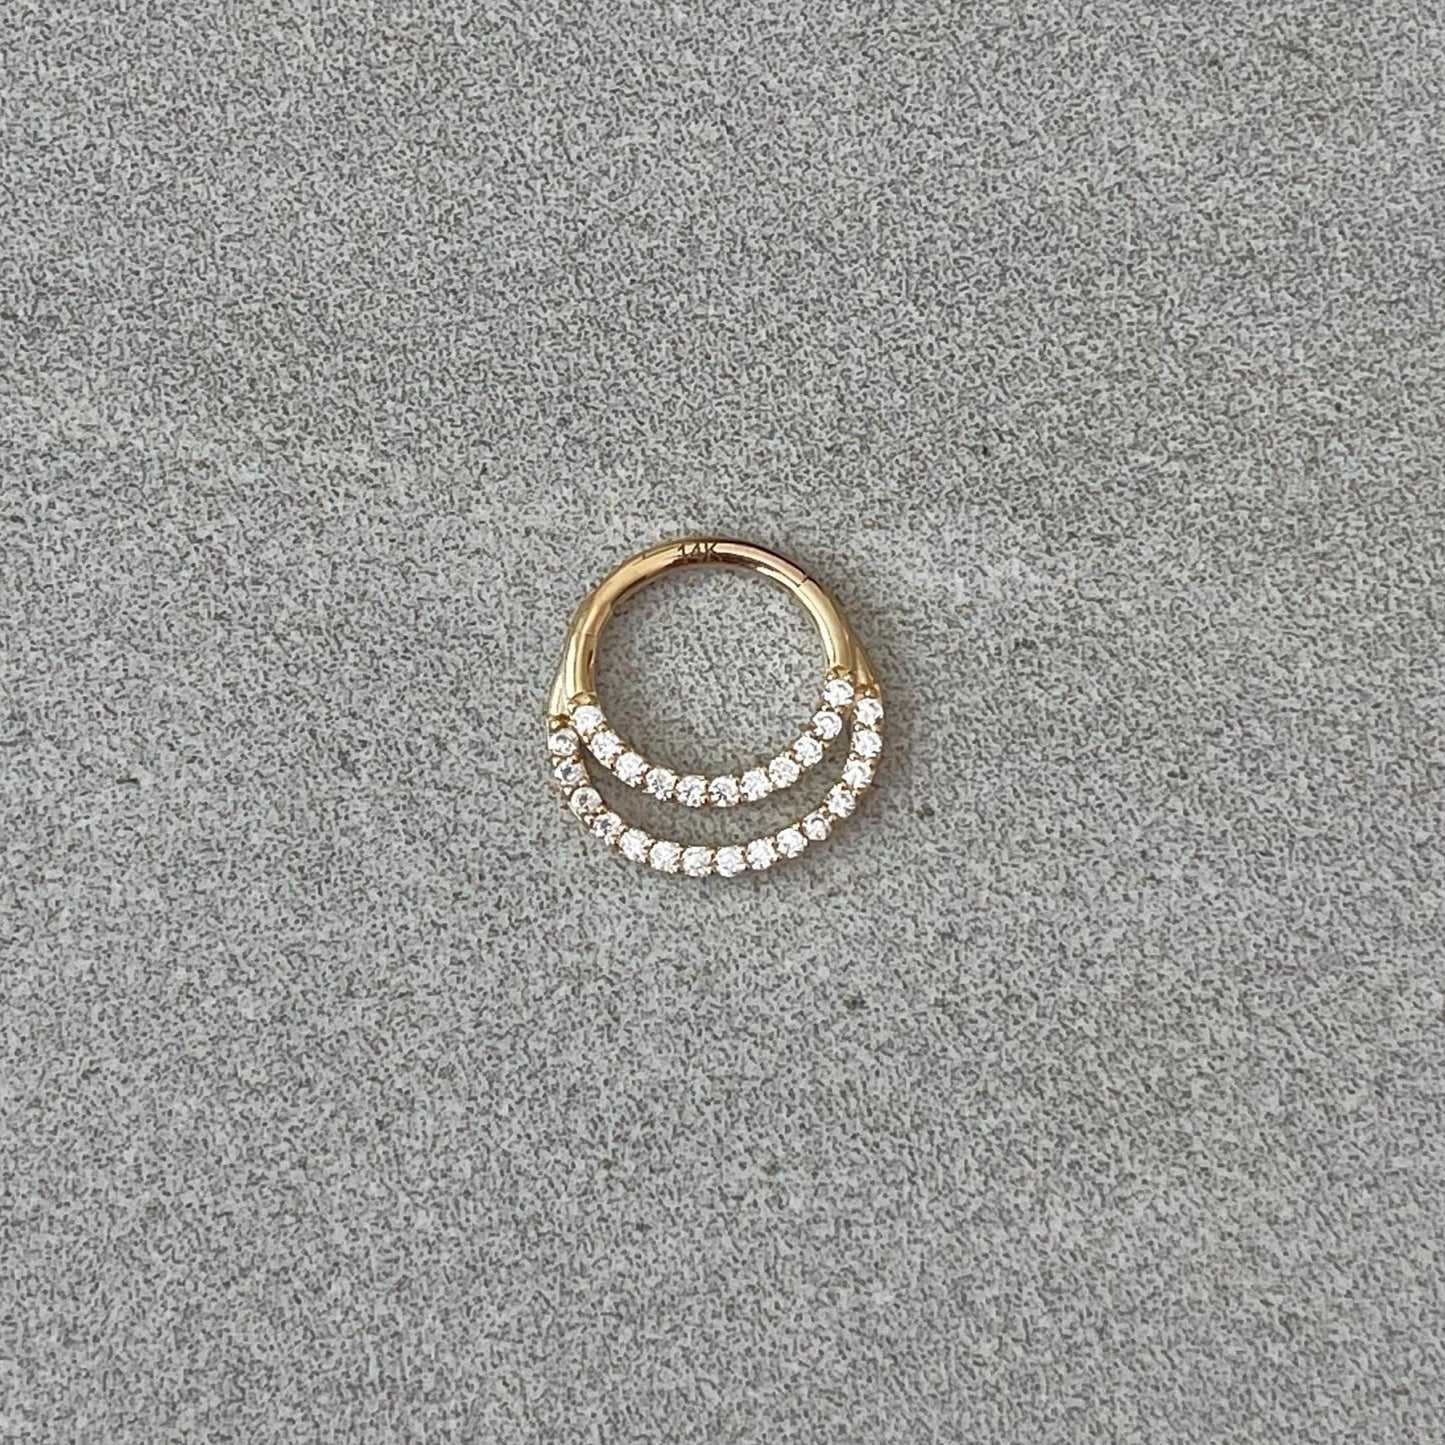 Solid Gold Septum Piercing (16G | 6mm, 8mm, or 10mm | 14k Solid Gold | Yellow or White Gold)